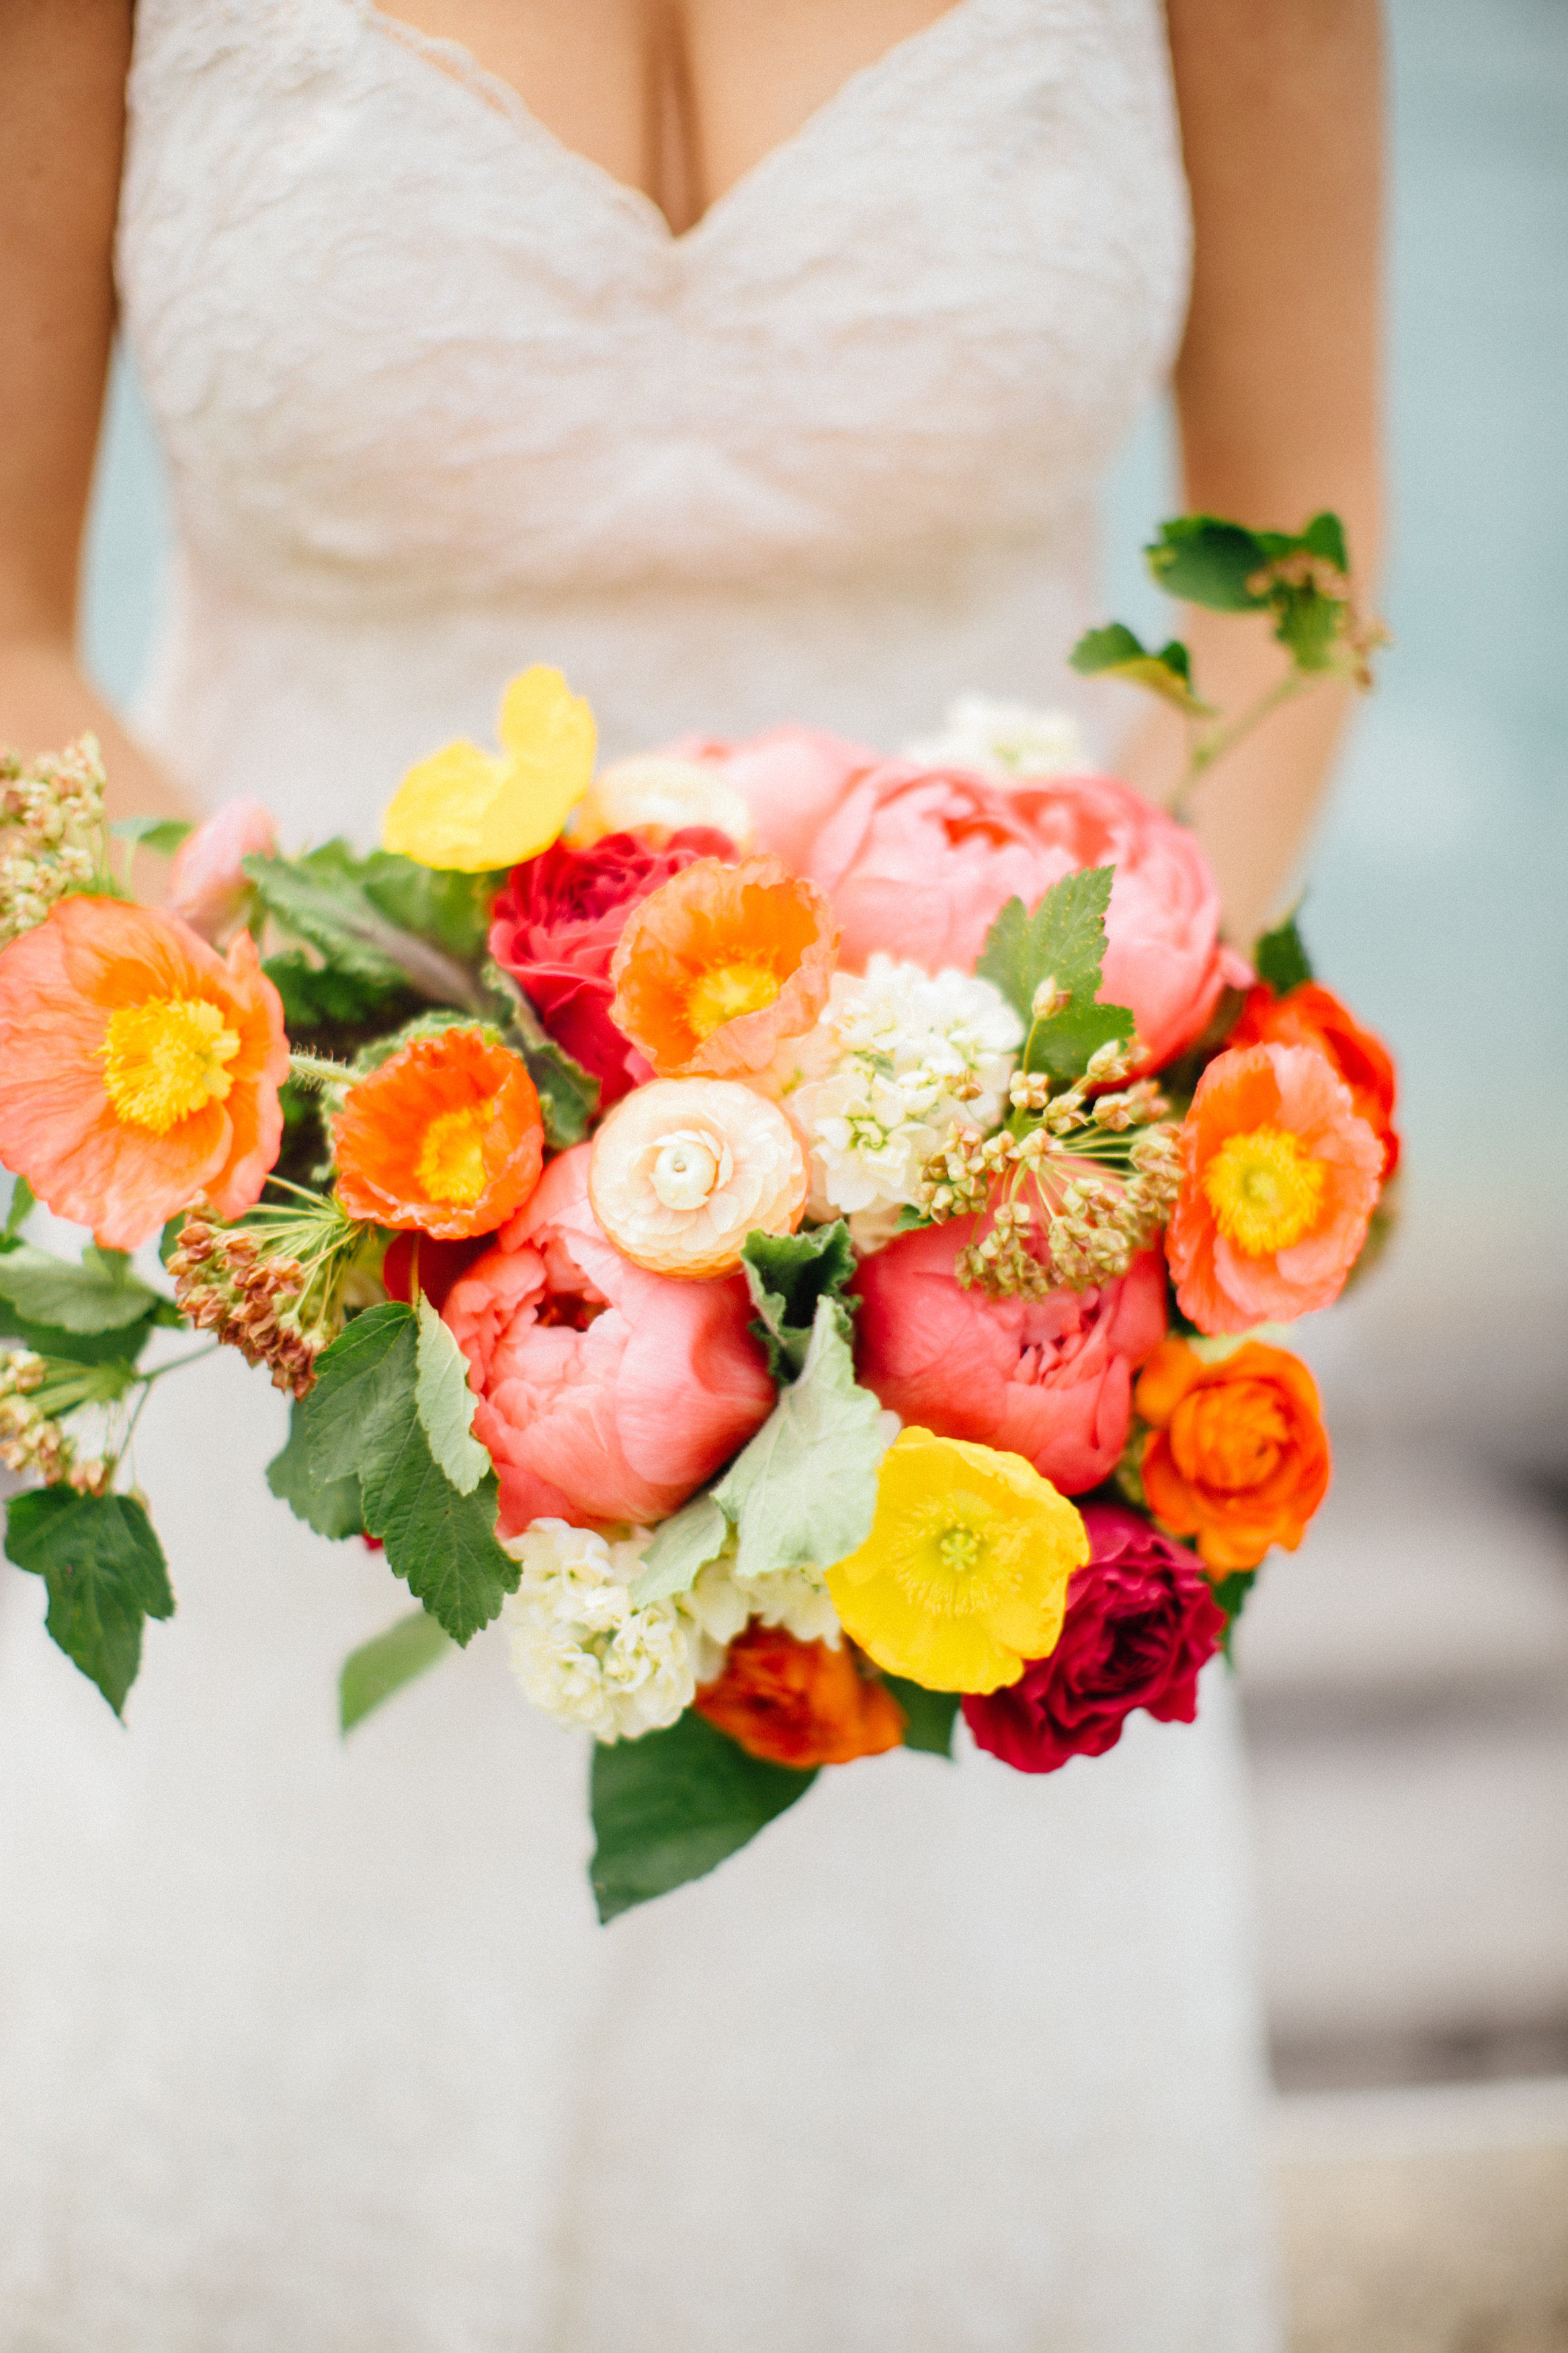 Spring bridal bouquet with coral peonies, poppies, and garden roses.